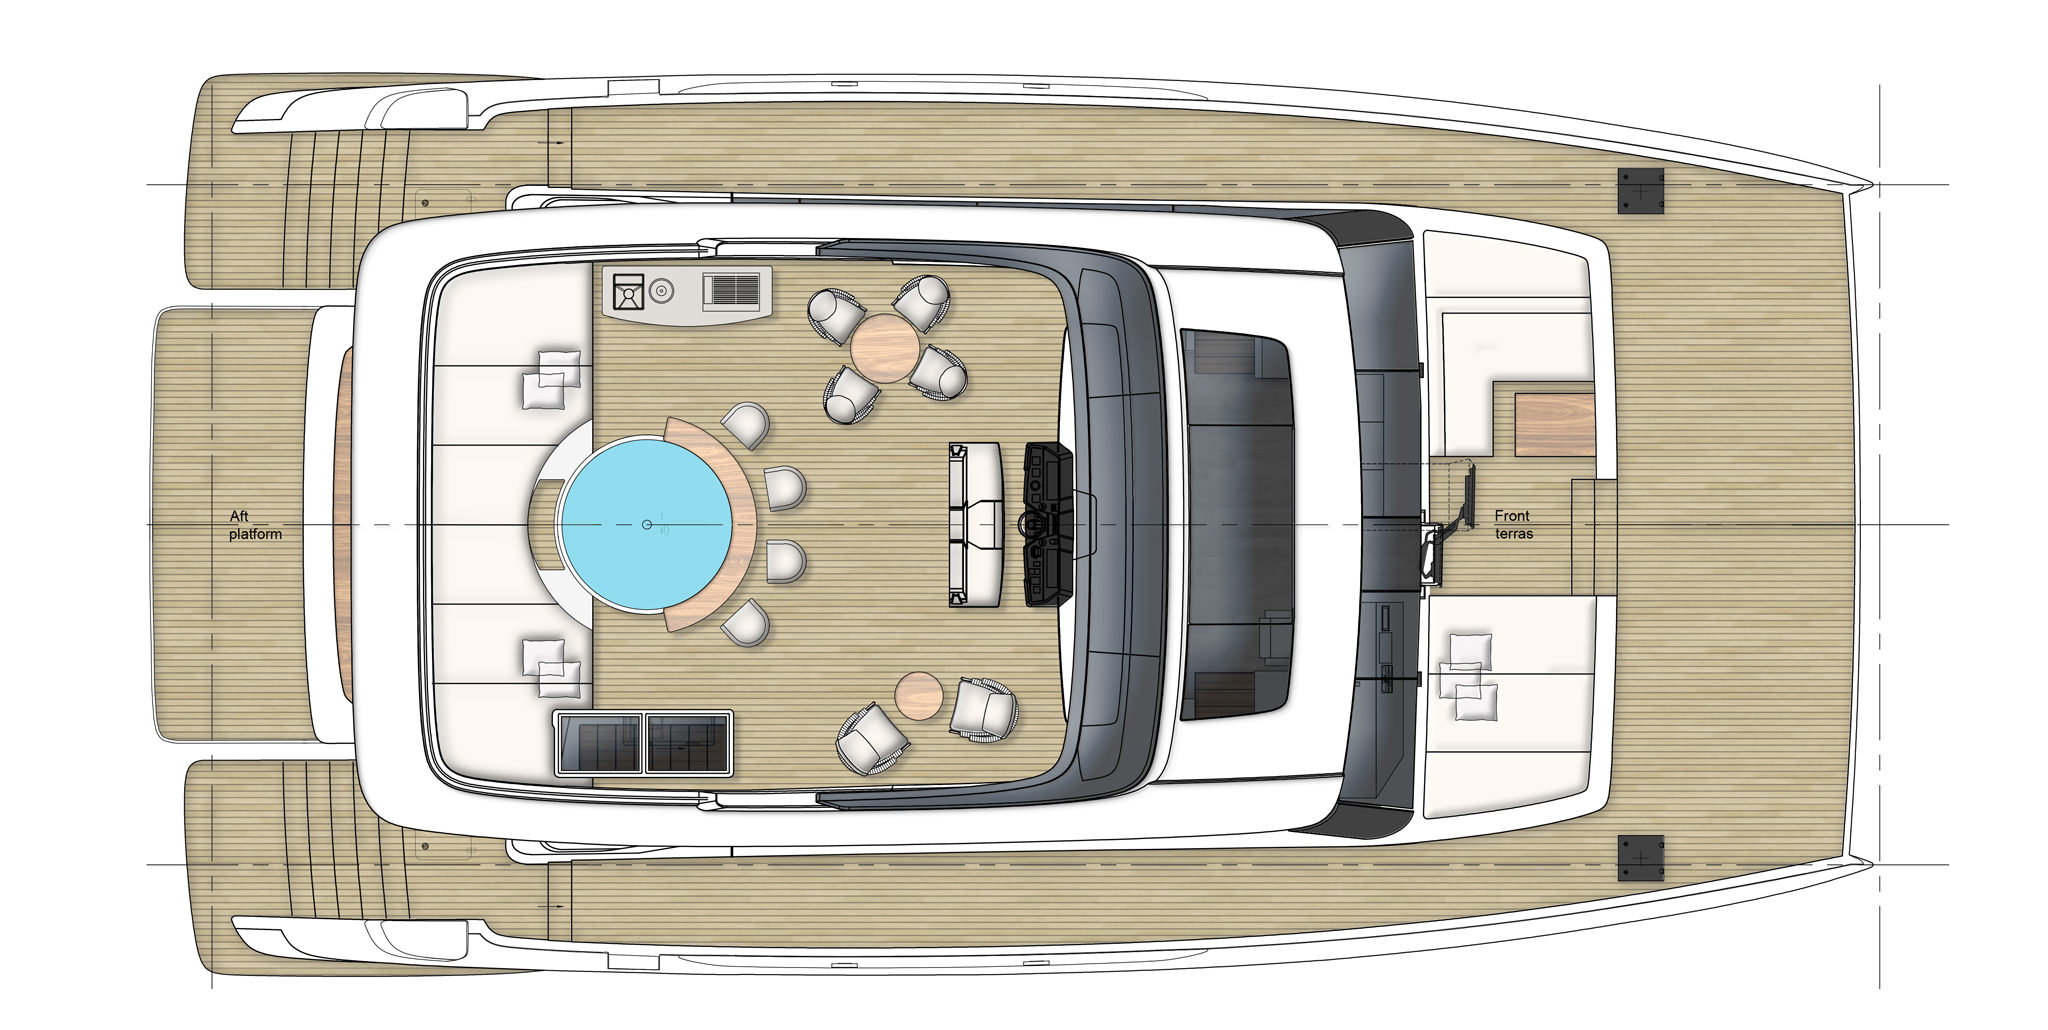 luxurious layout option for yacht